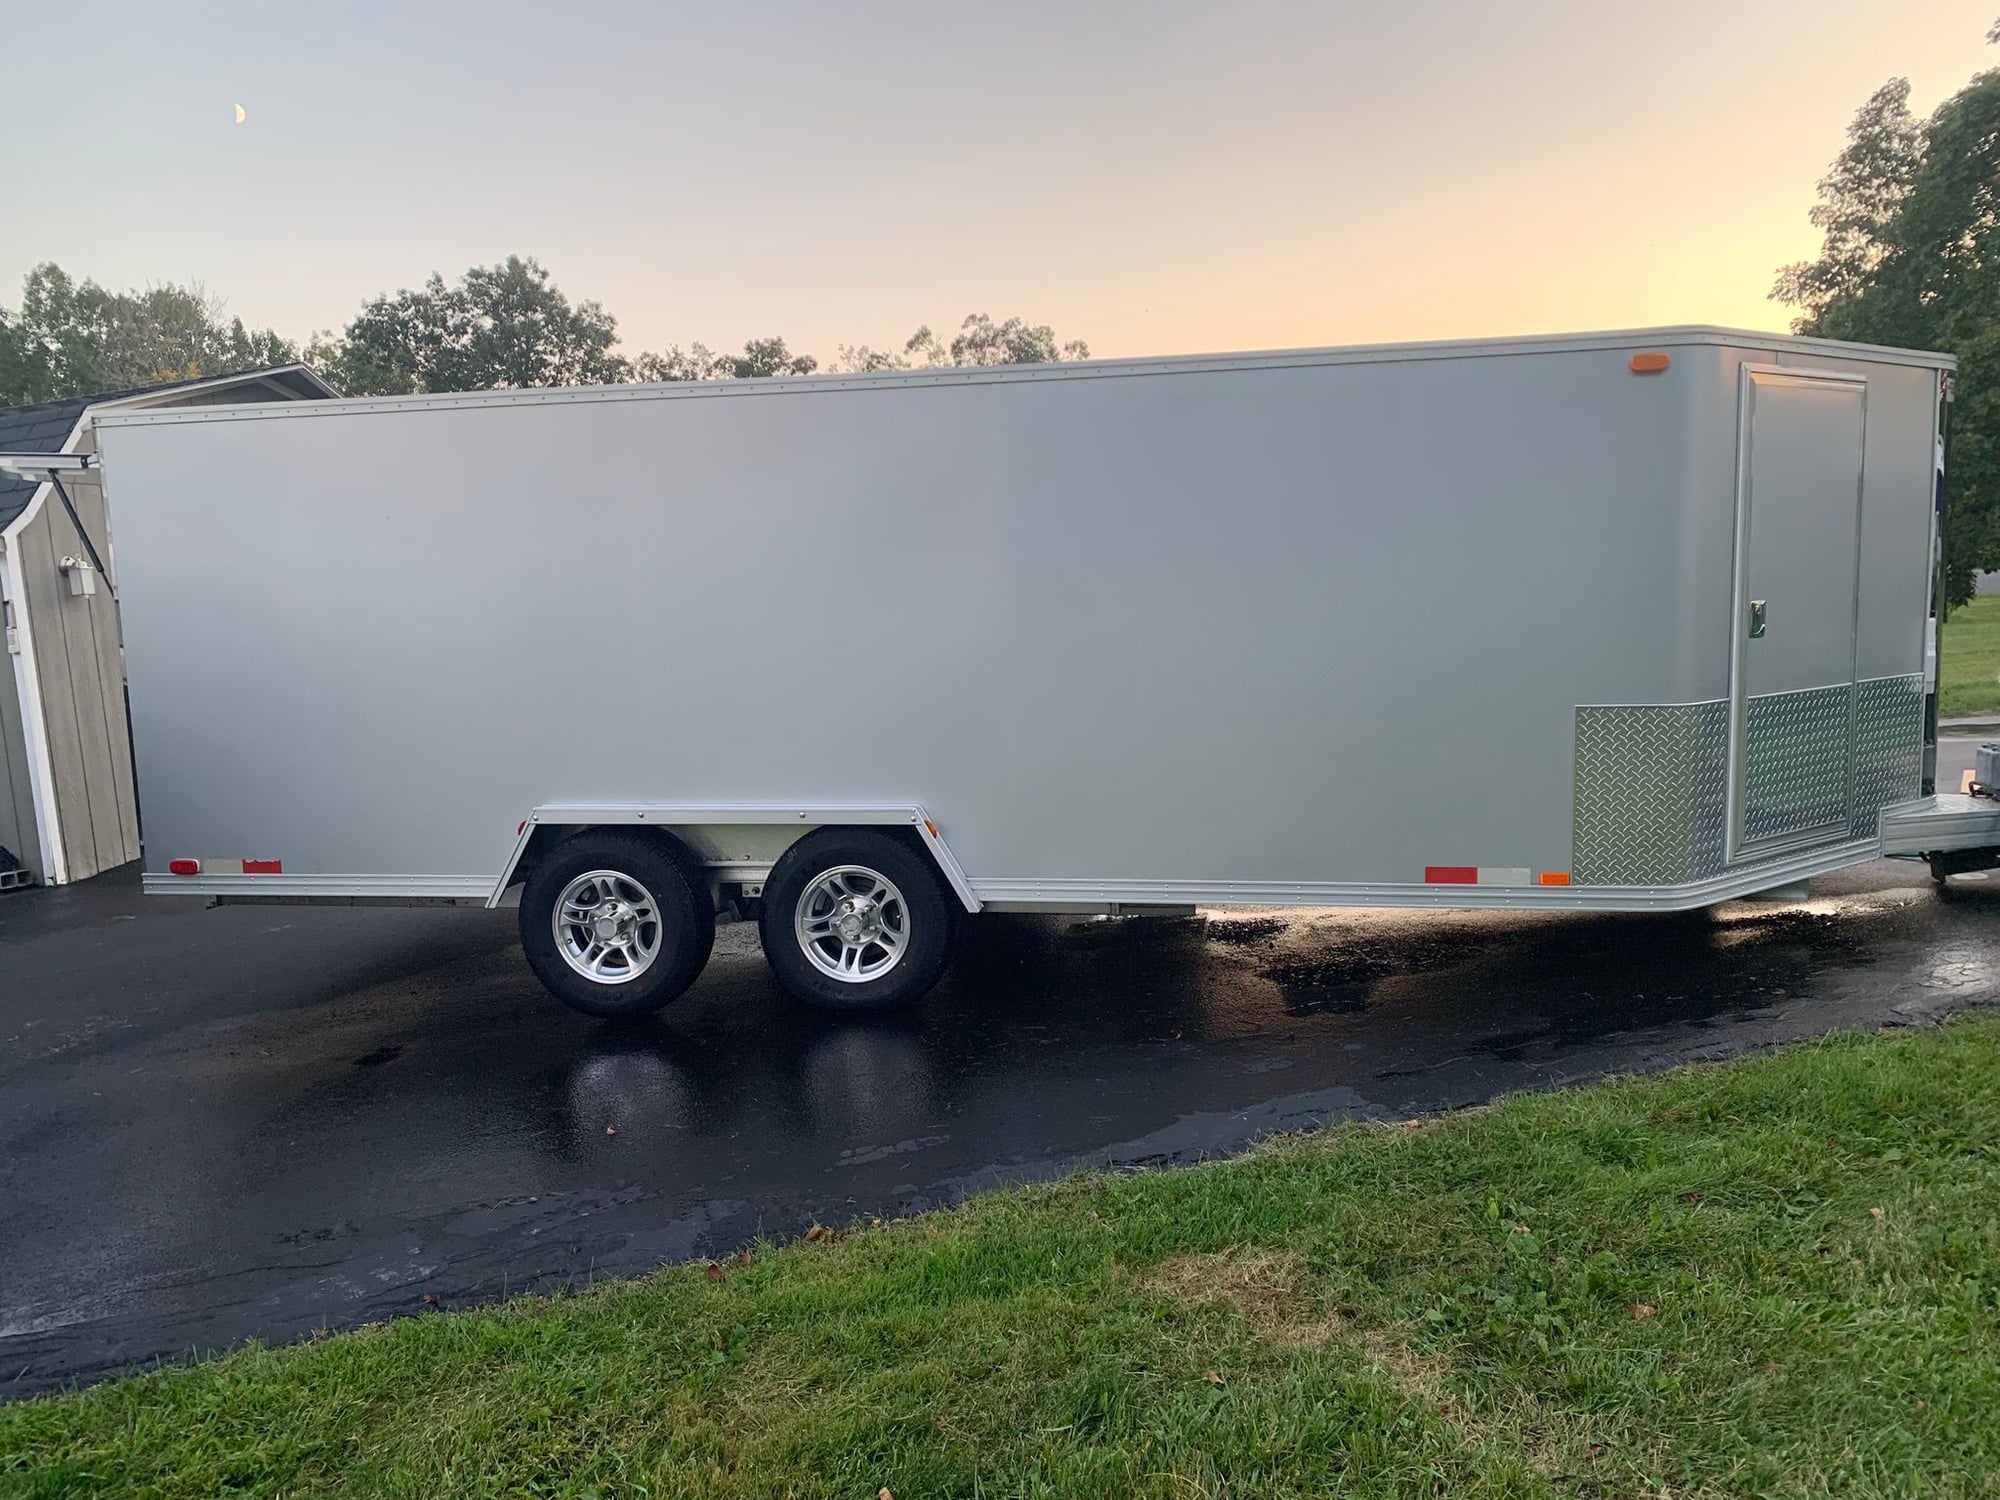 Miscellaneous - Trailex Sports Car Trailer model 84180T 2015 like new condition. - Used - Clayton, NY 13624, United States